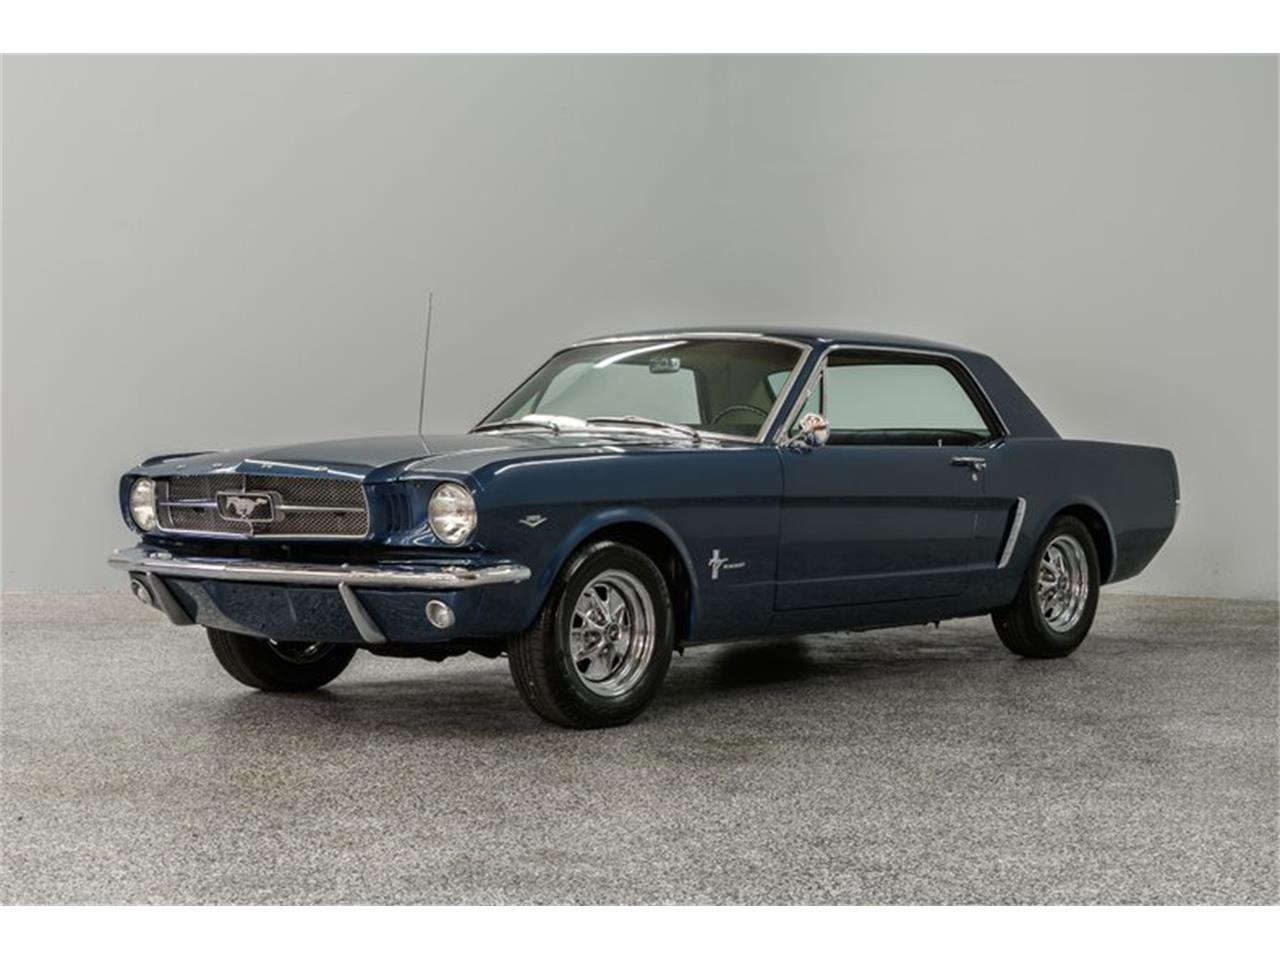 1965 Ford Mustang for sale in Concord, NC